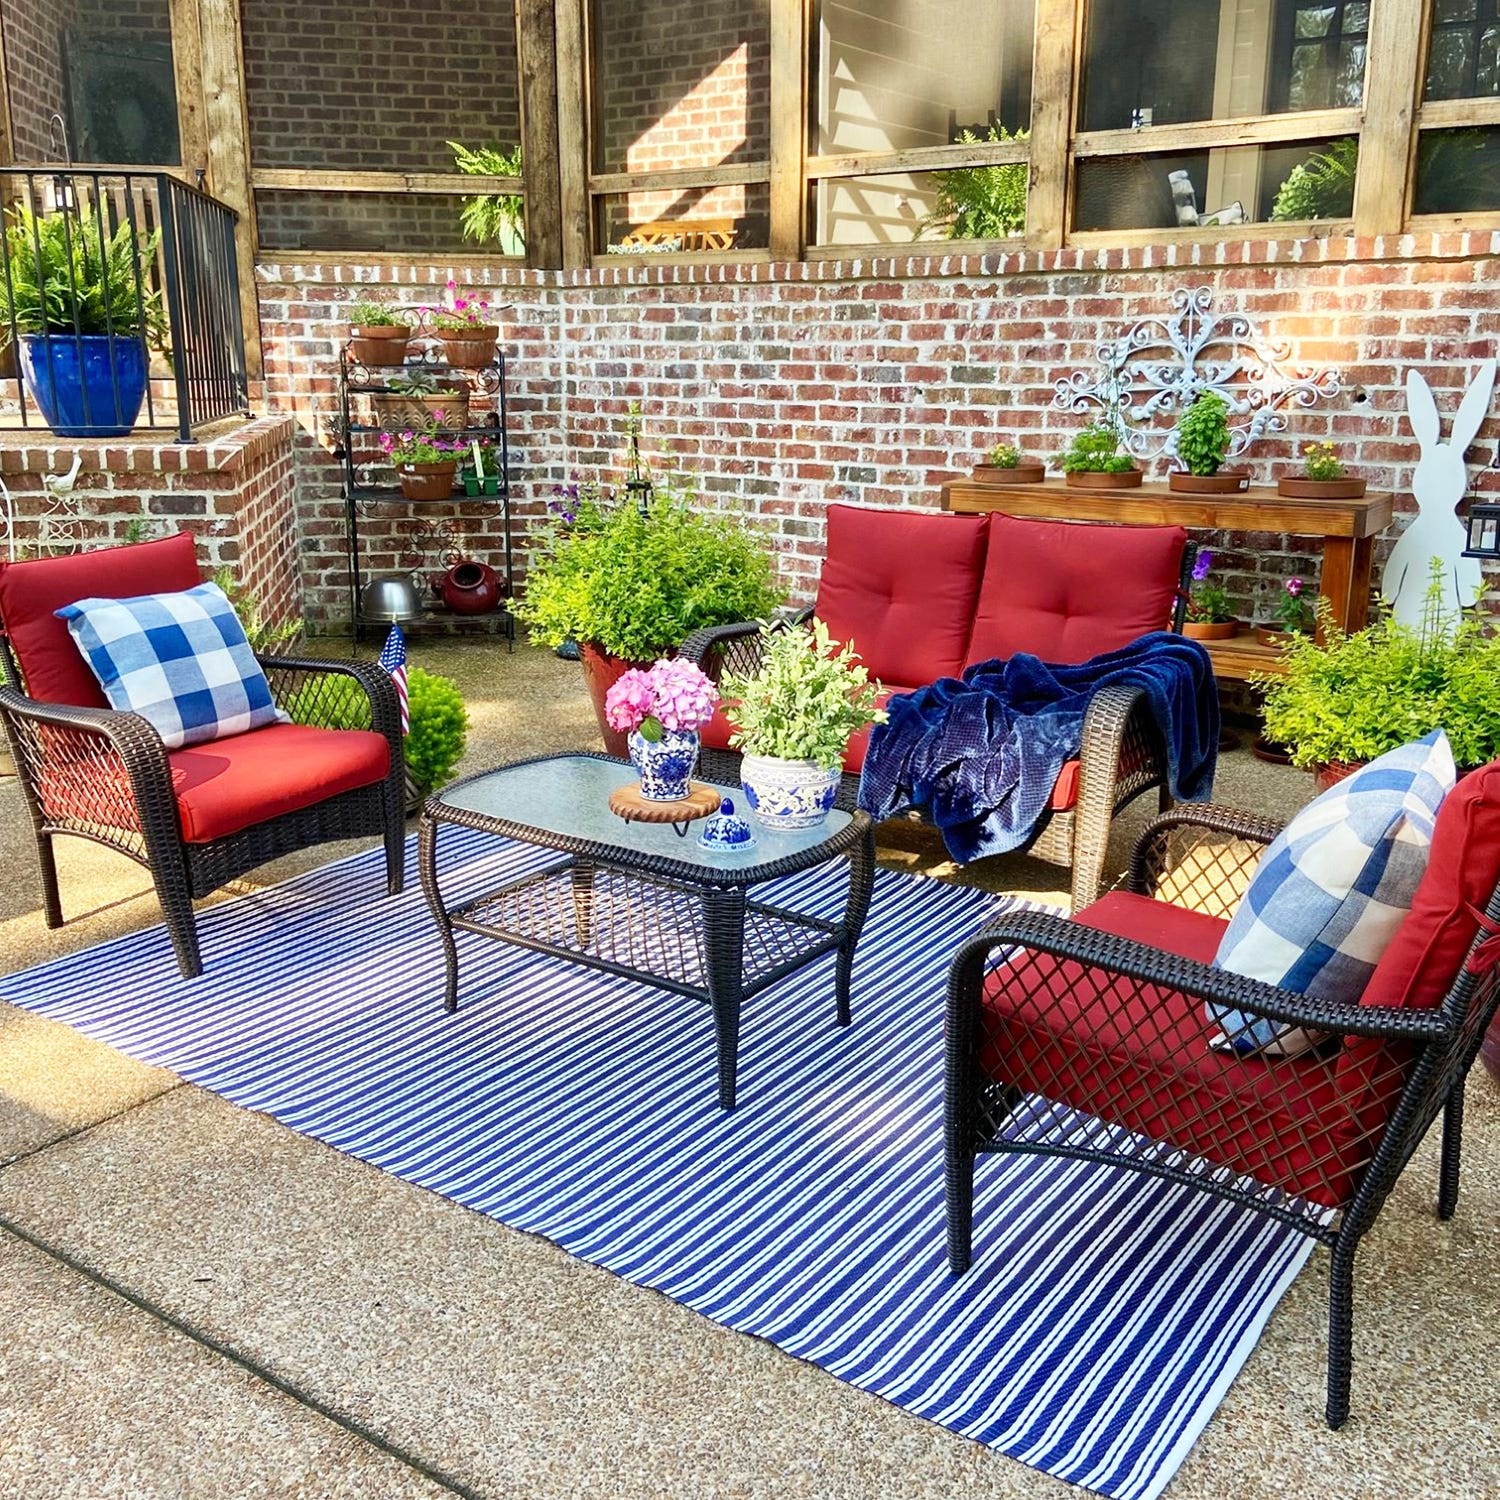 Outdoor patio furniture set with red cushions, a striped rug, and decorative plants.